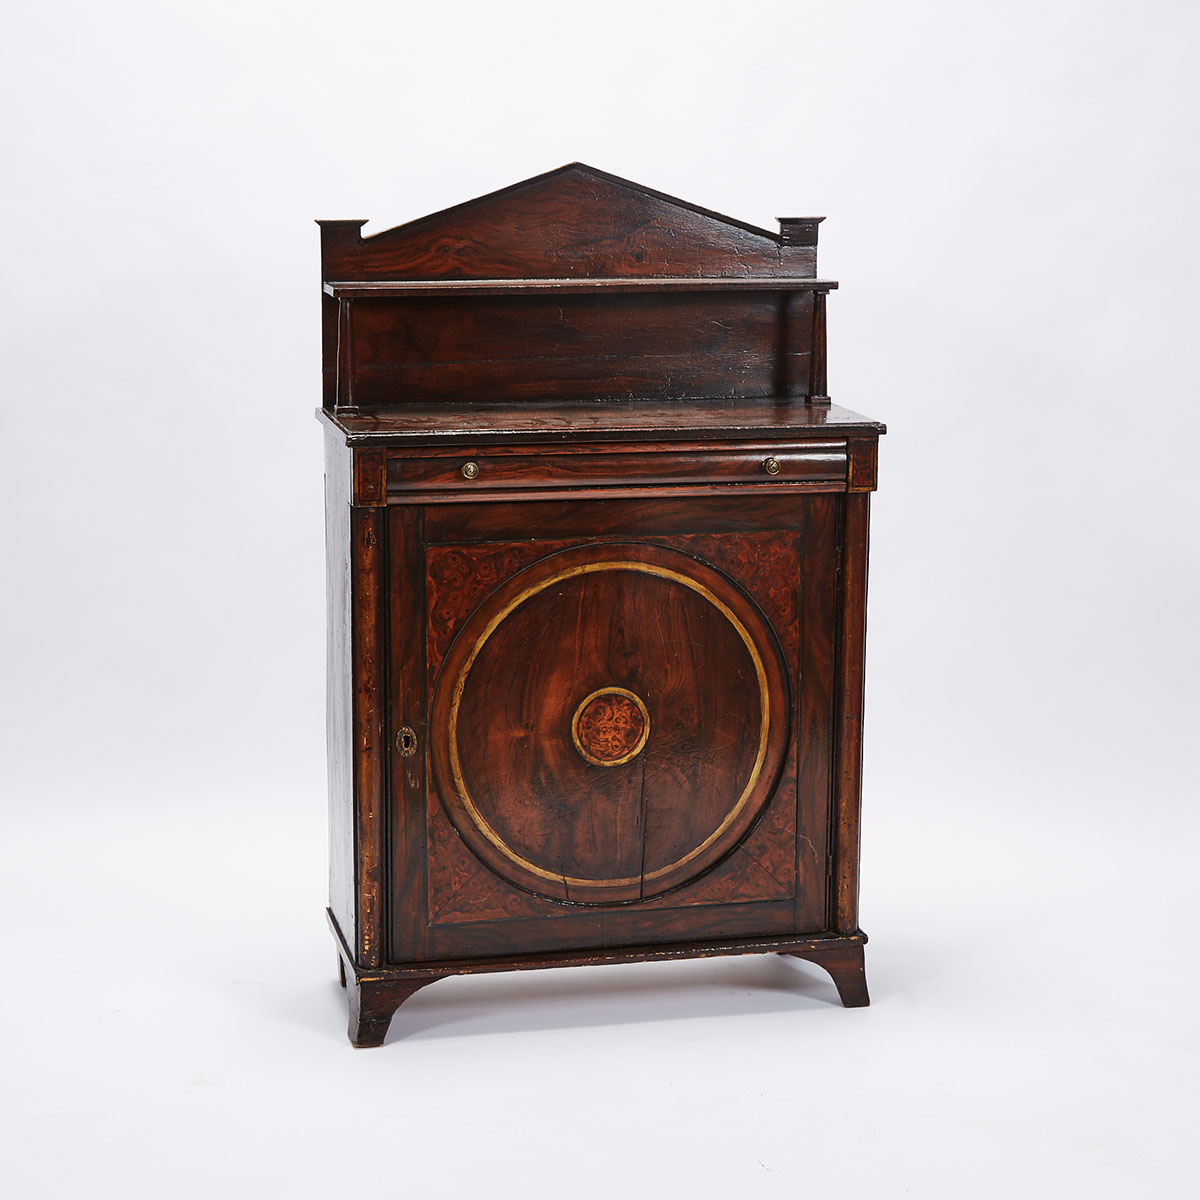 Small Victorian Rosewood and Burl Walnut Sideboard, mid-19th century